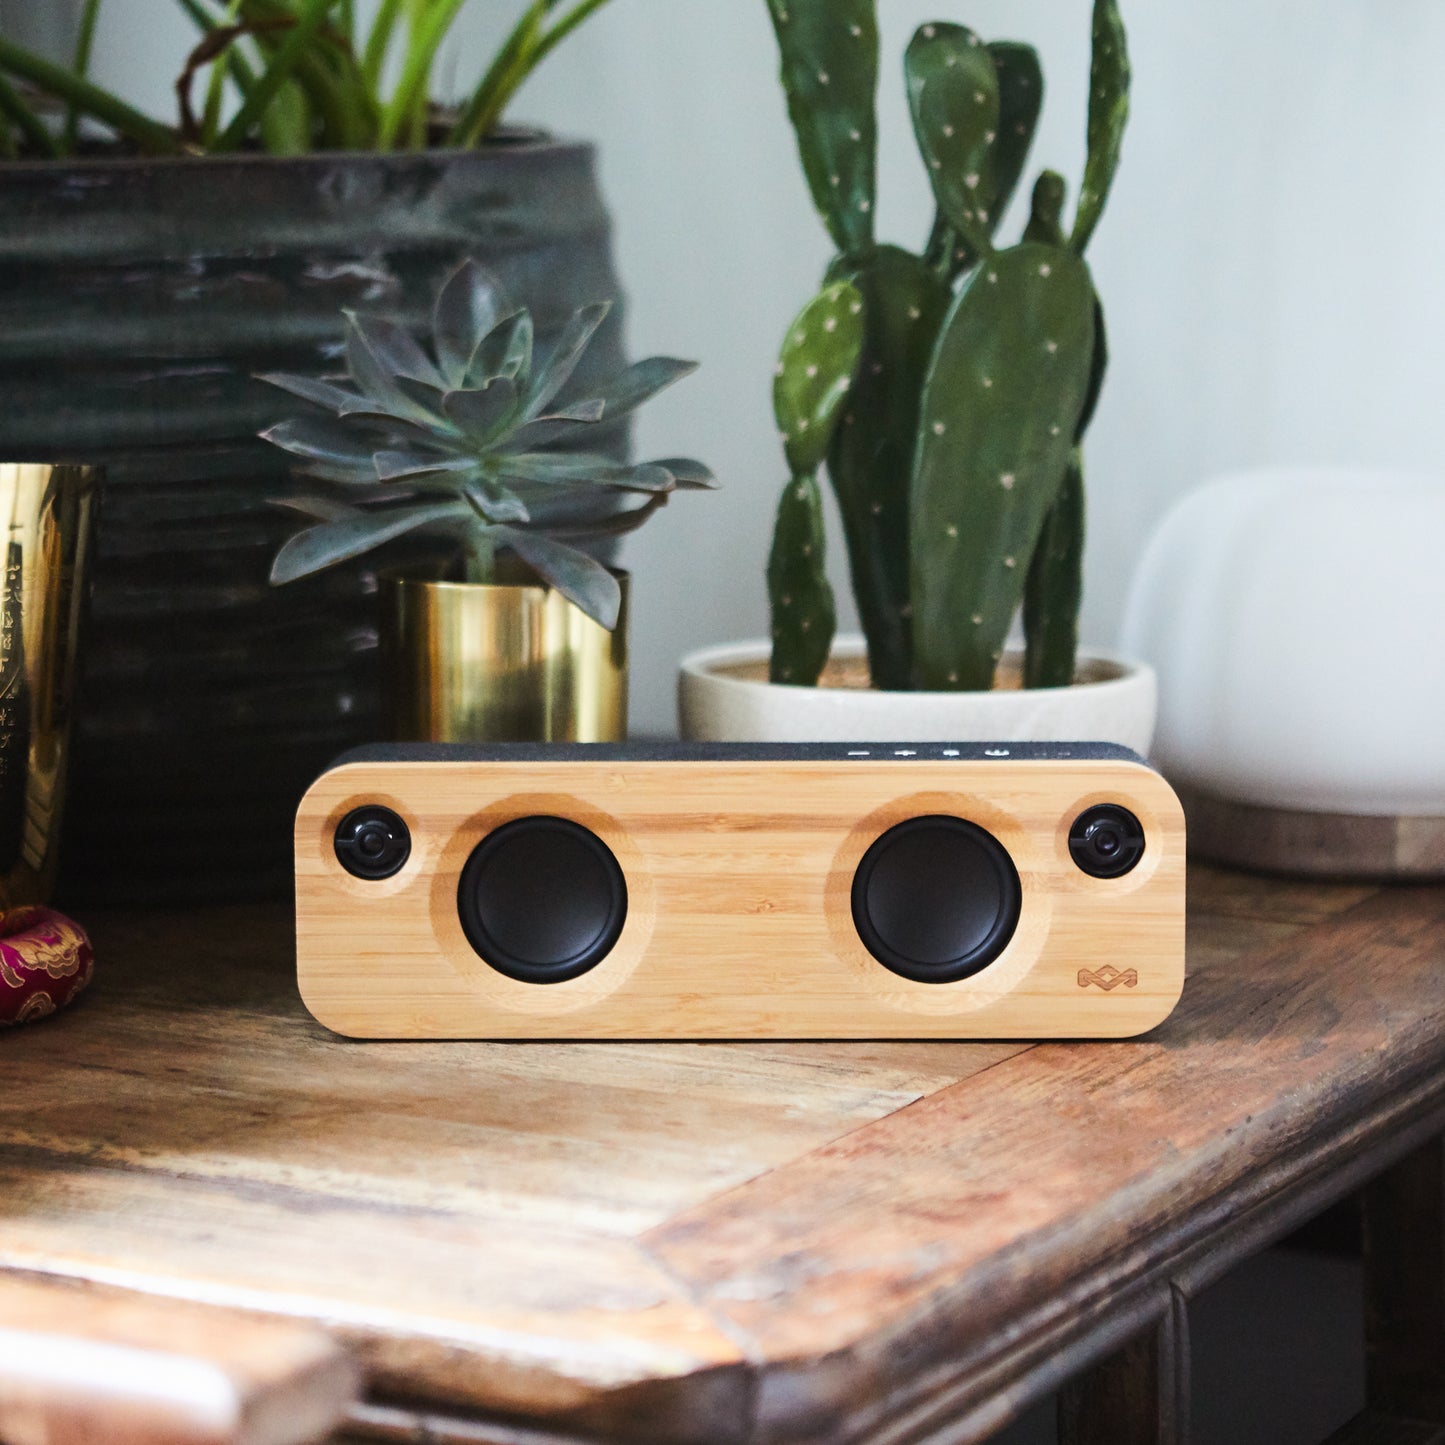 House of Marley Get Together Mini bluetooth speaker black - Crystal clear sound, durable design and wireless freedom